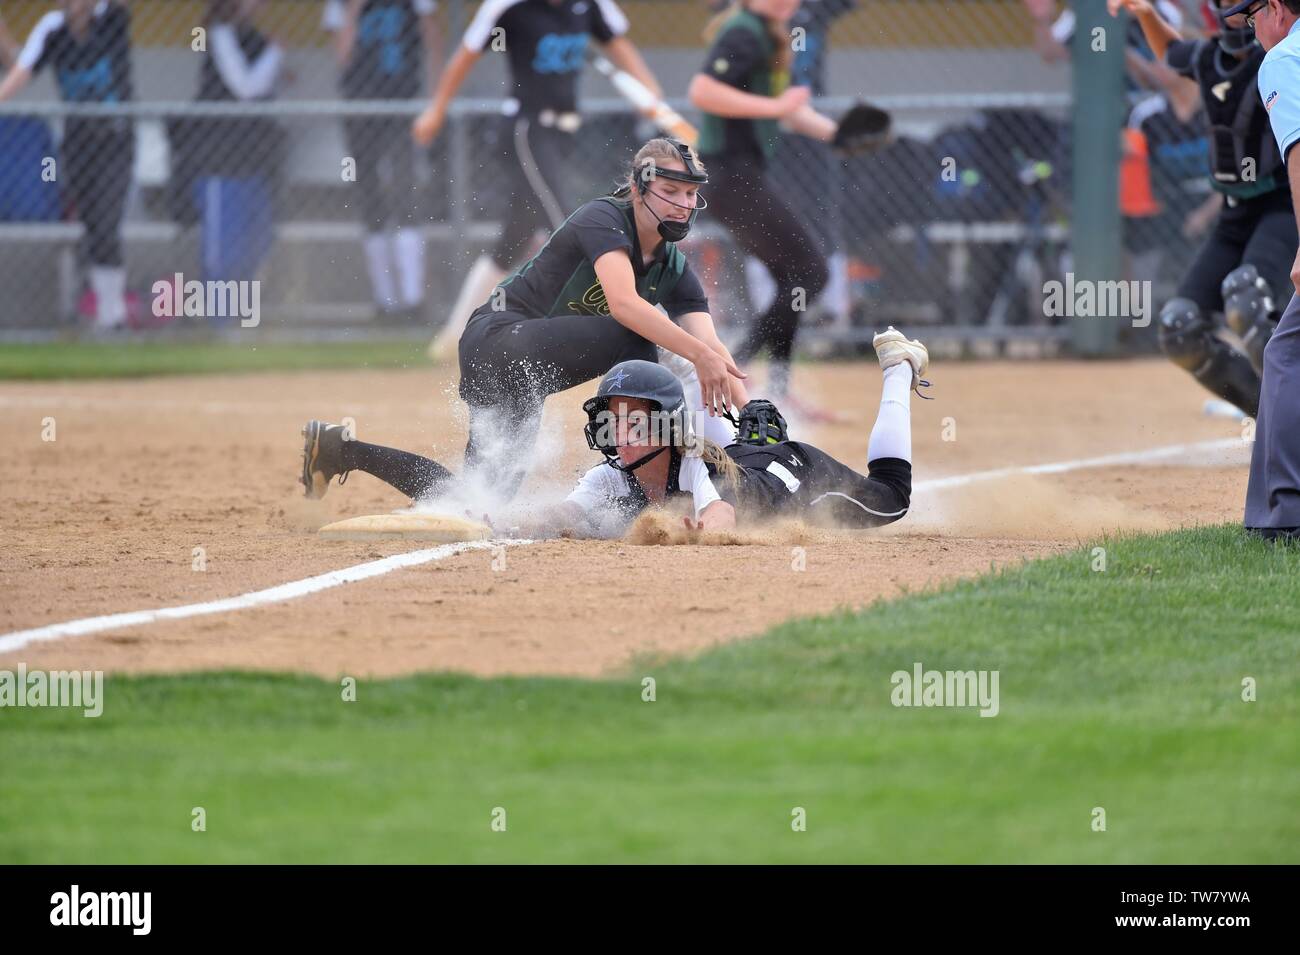 After progressing about two-thirds of the way to the plate on a teammate's ground ball, a runner was forced back to third base. USA. Stock Photo